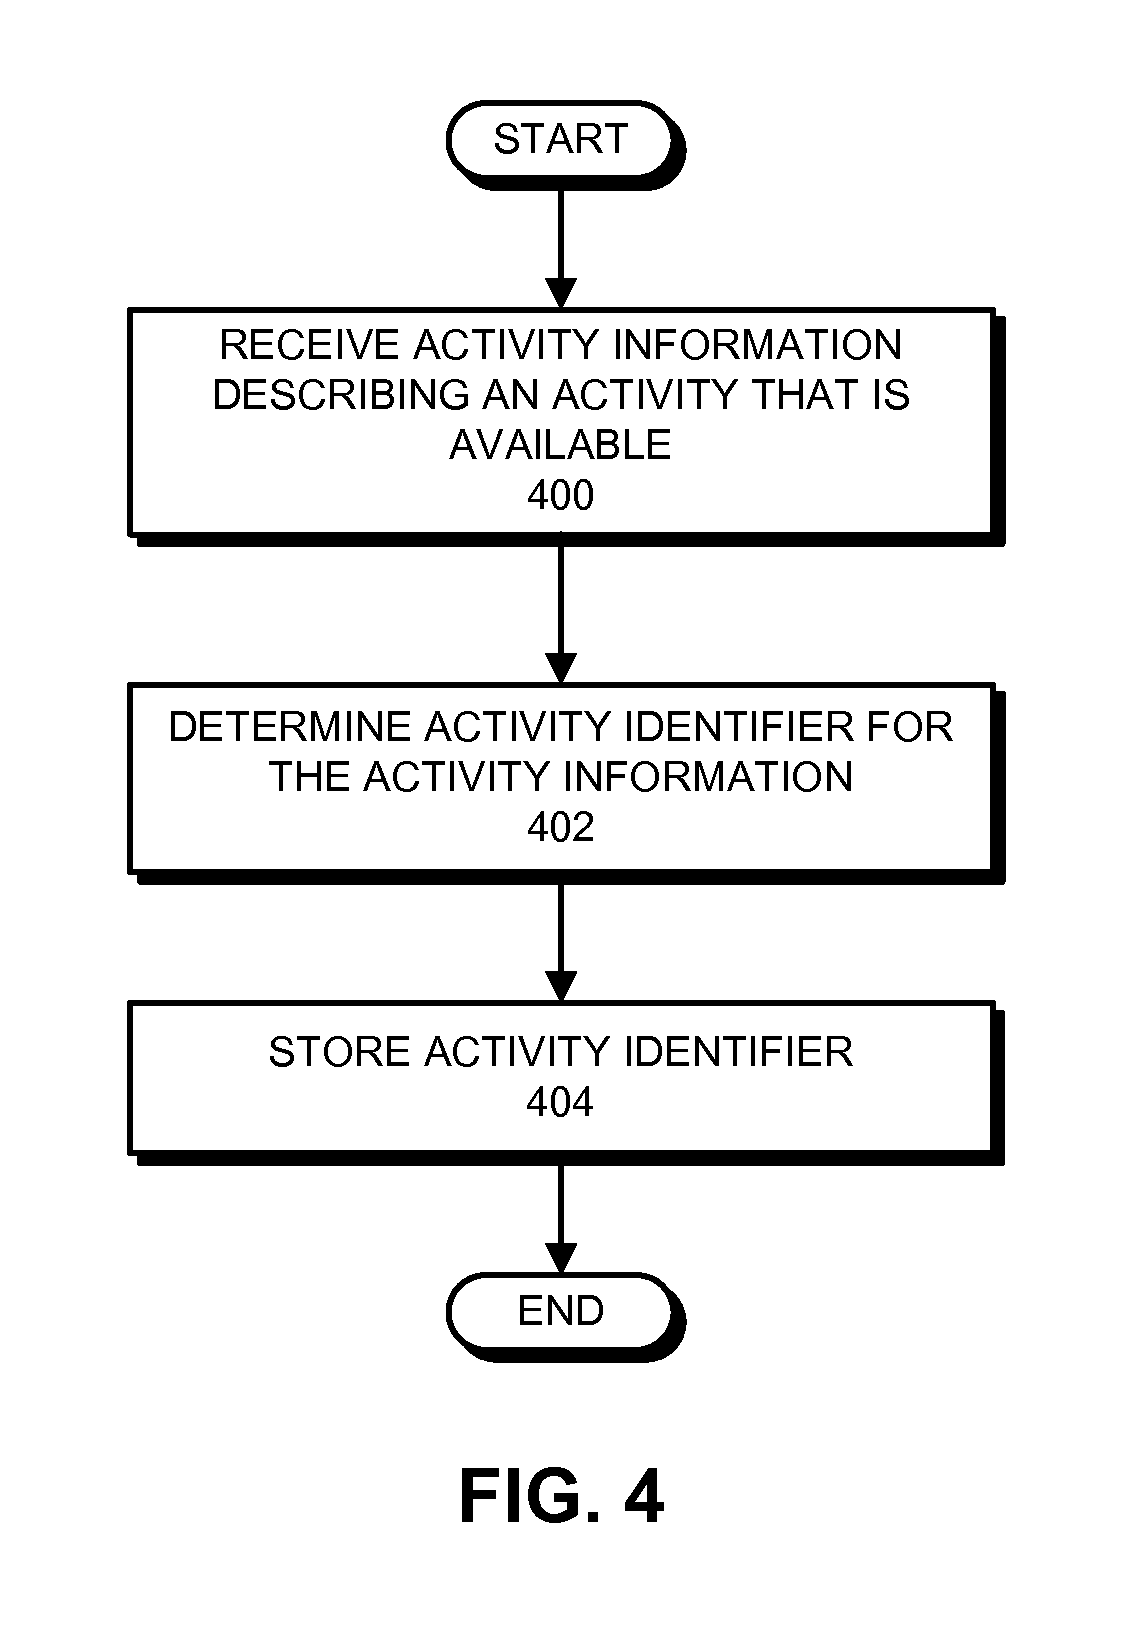 Forwarding activity-related information from source electronic devices to companion electronic devices